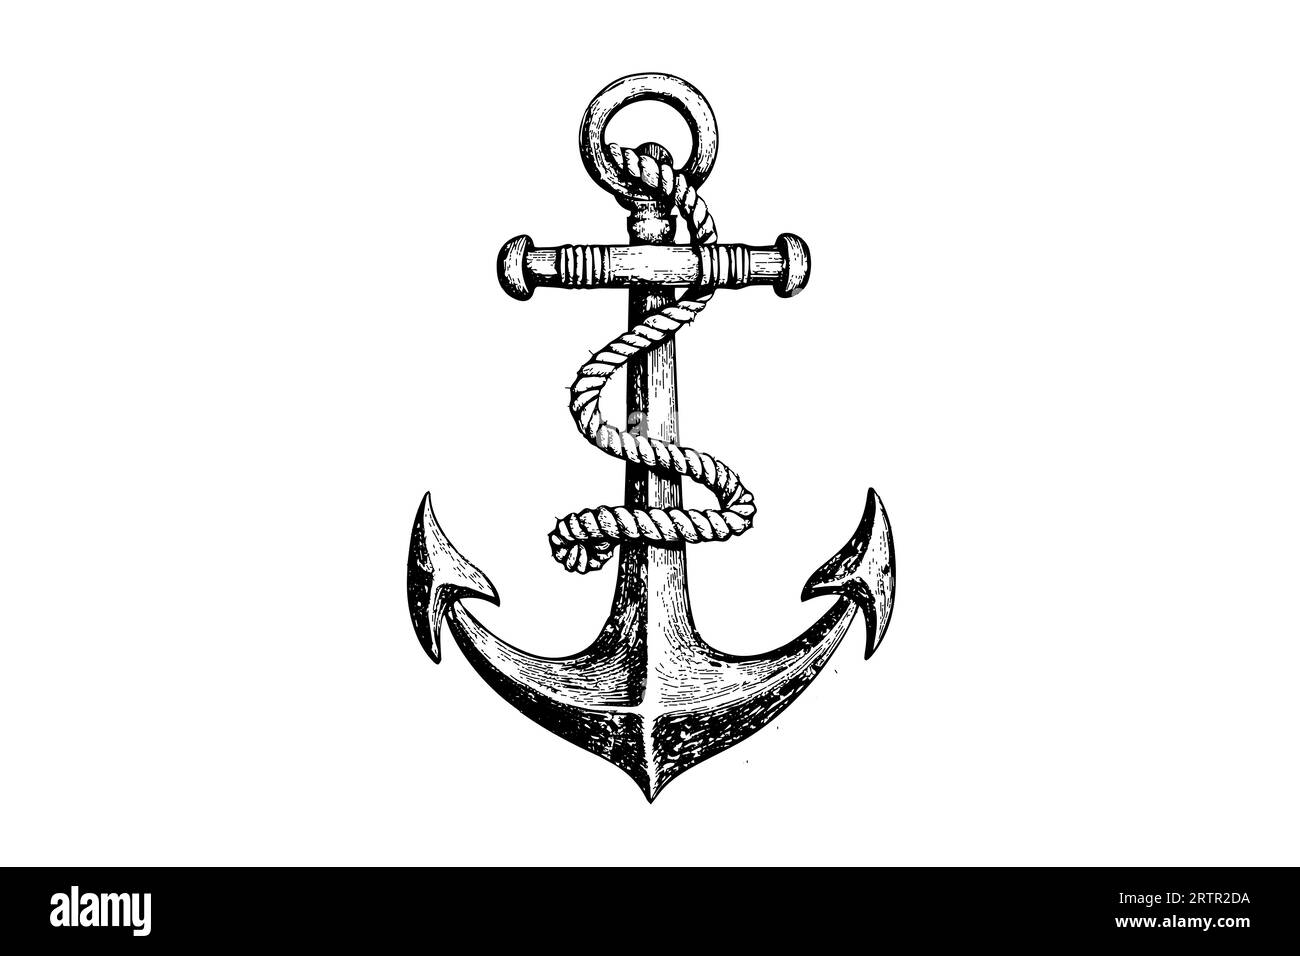 Ship anchor and rope in vintage engraving style. Sketch hand drawn ...